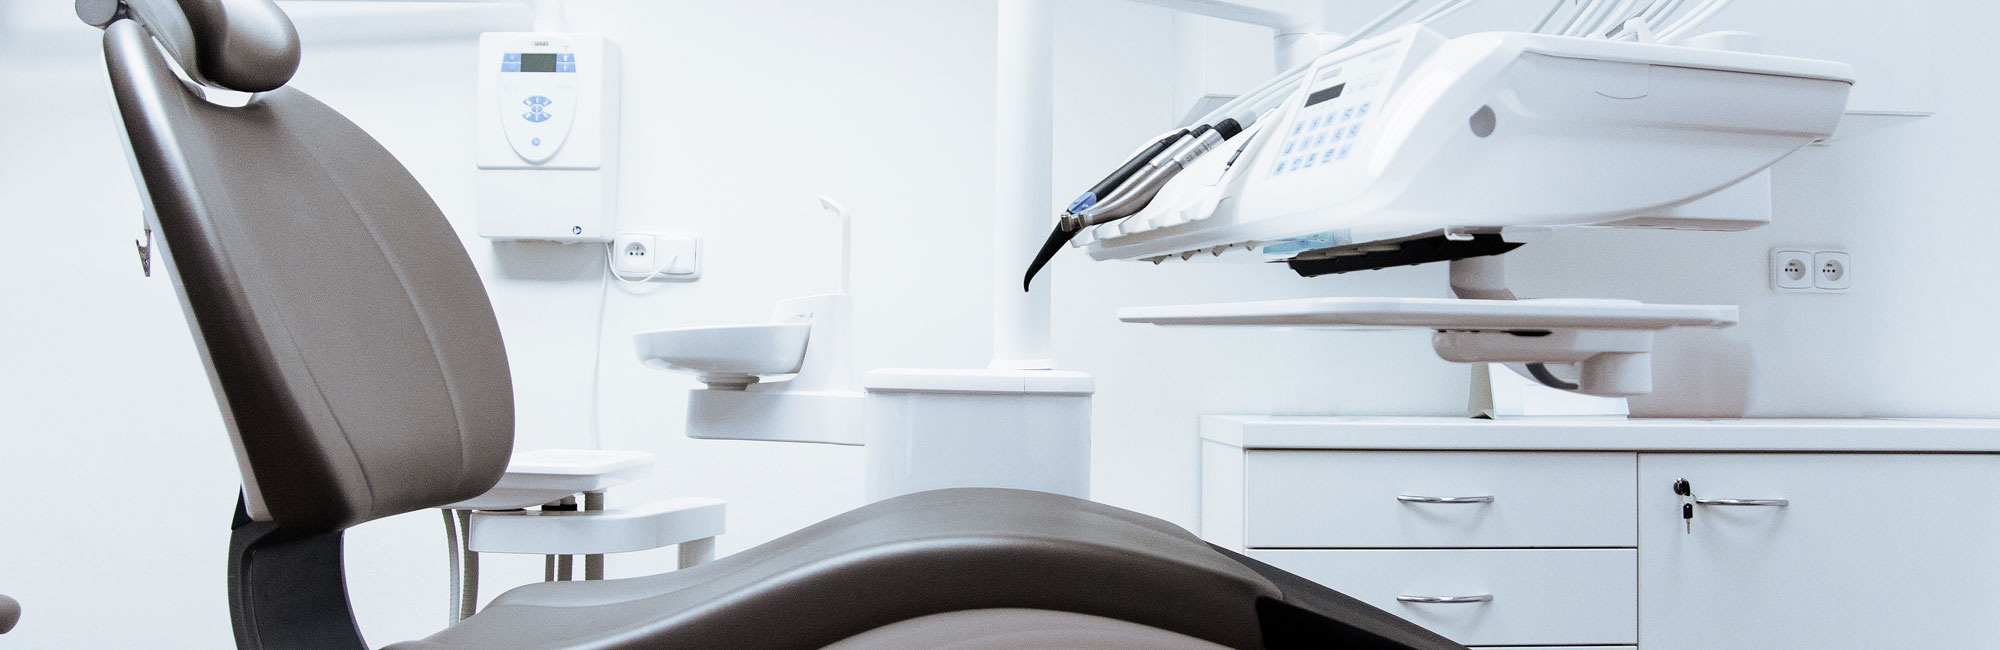 5 Location Factors to Consider When Searching for a Dentist Office